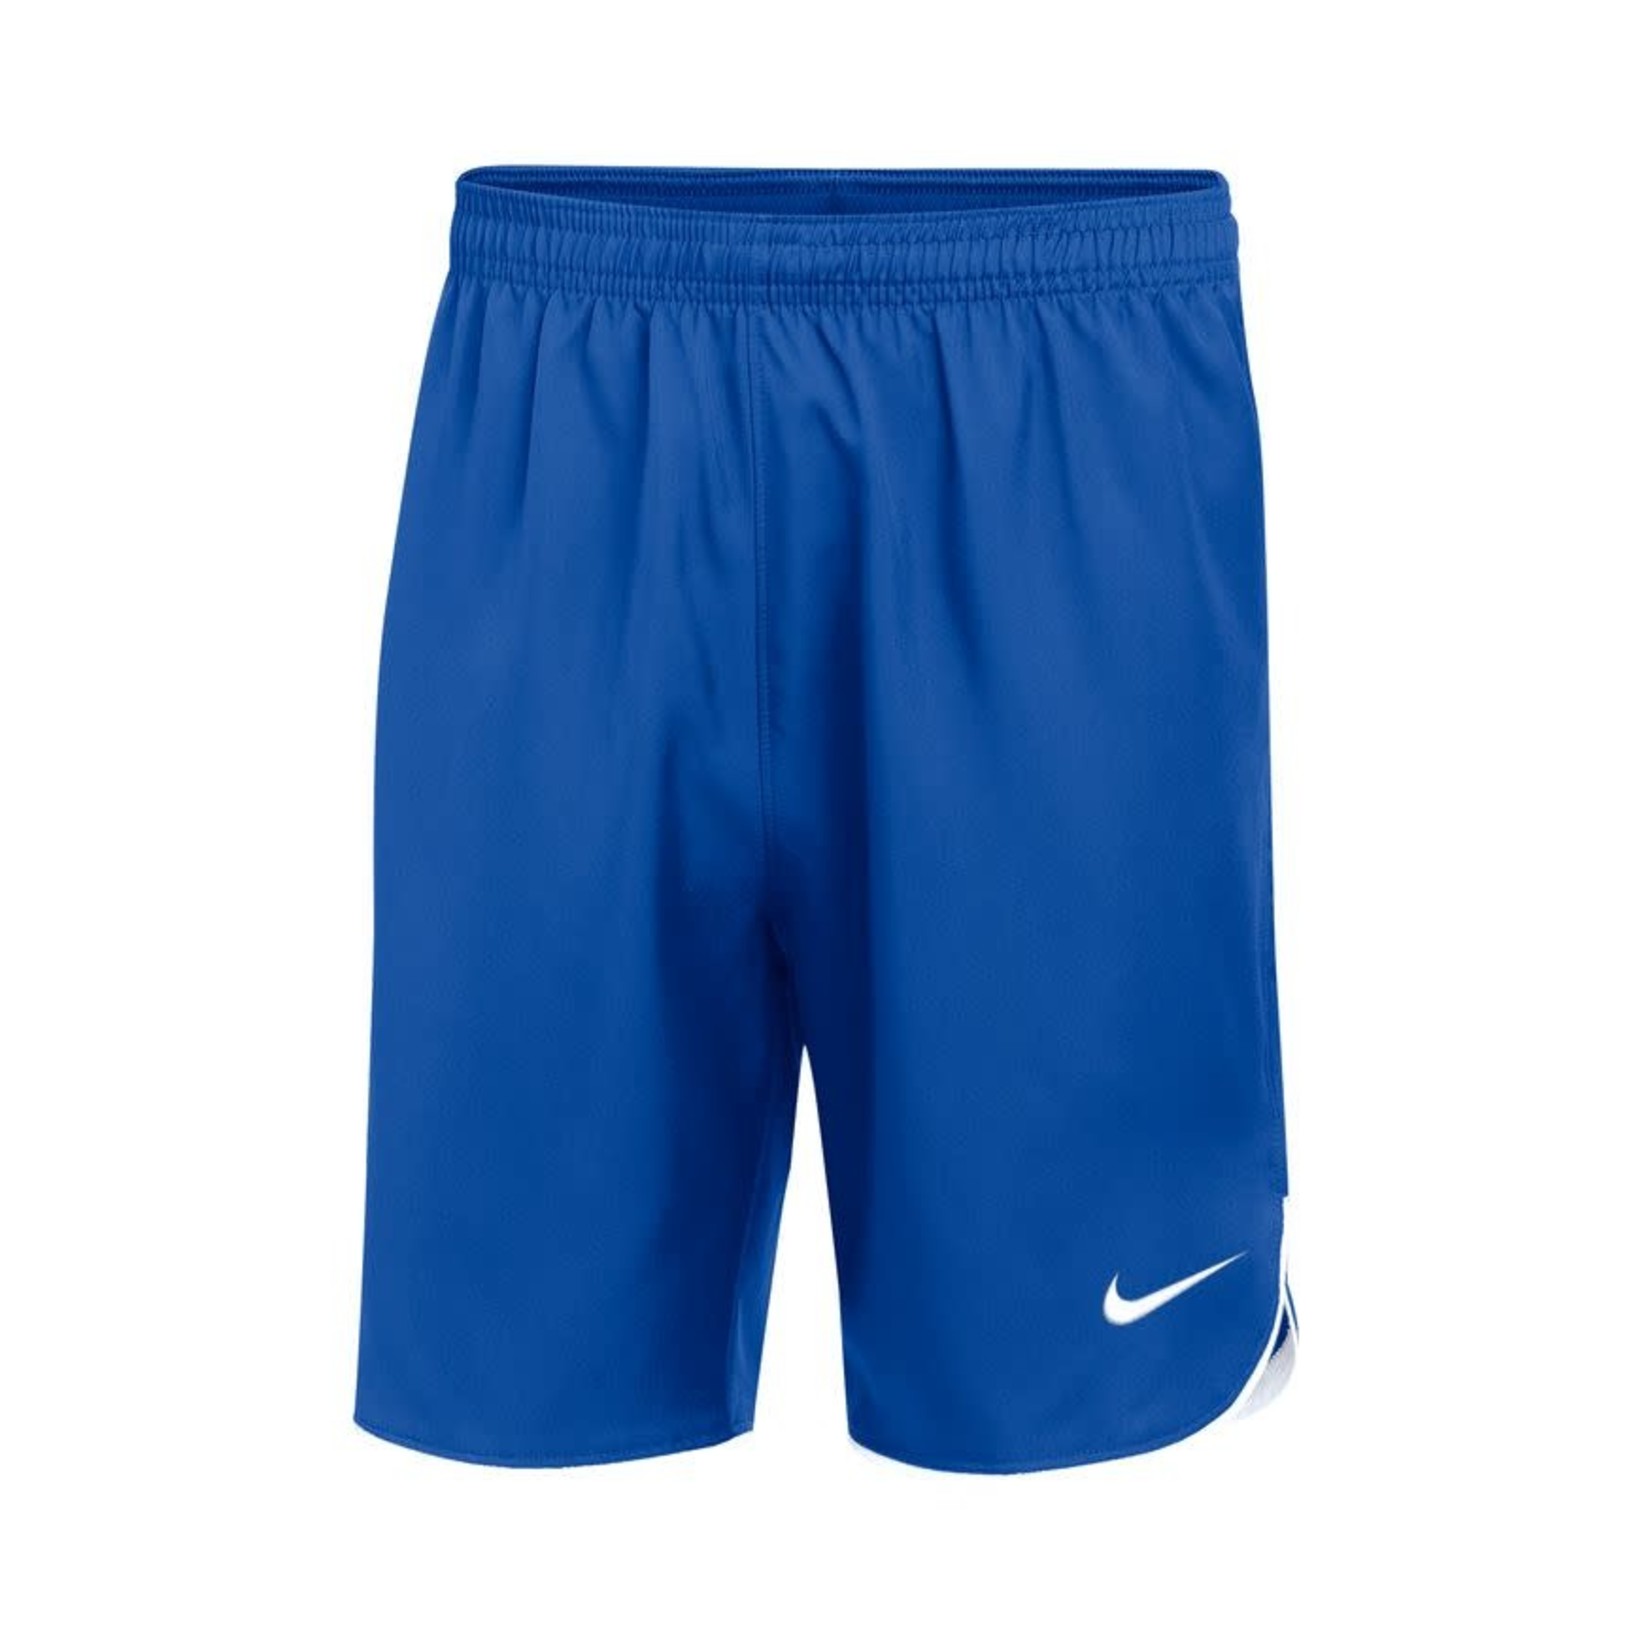 NIKE LASER 5 WOVEN SHORTS YOUTH (BLUE)